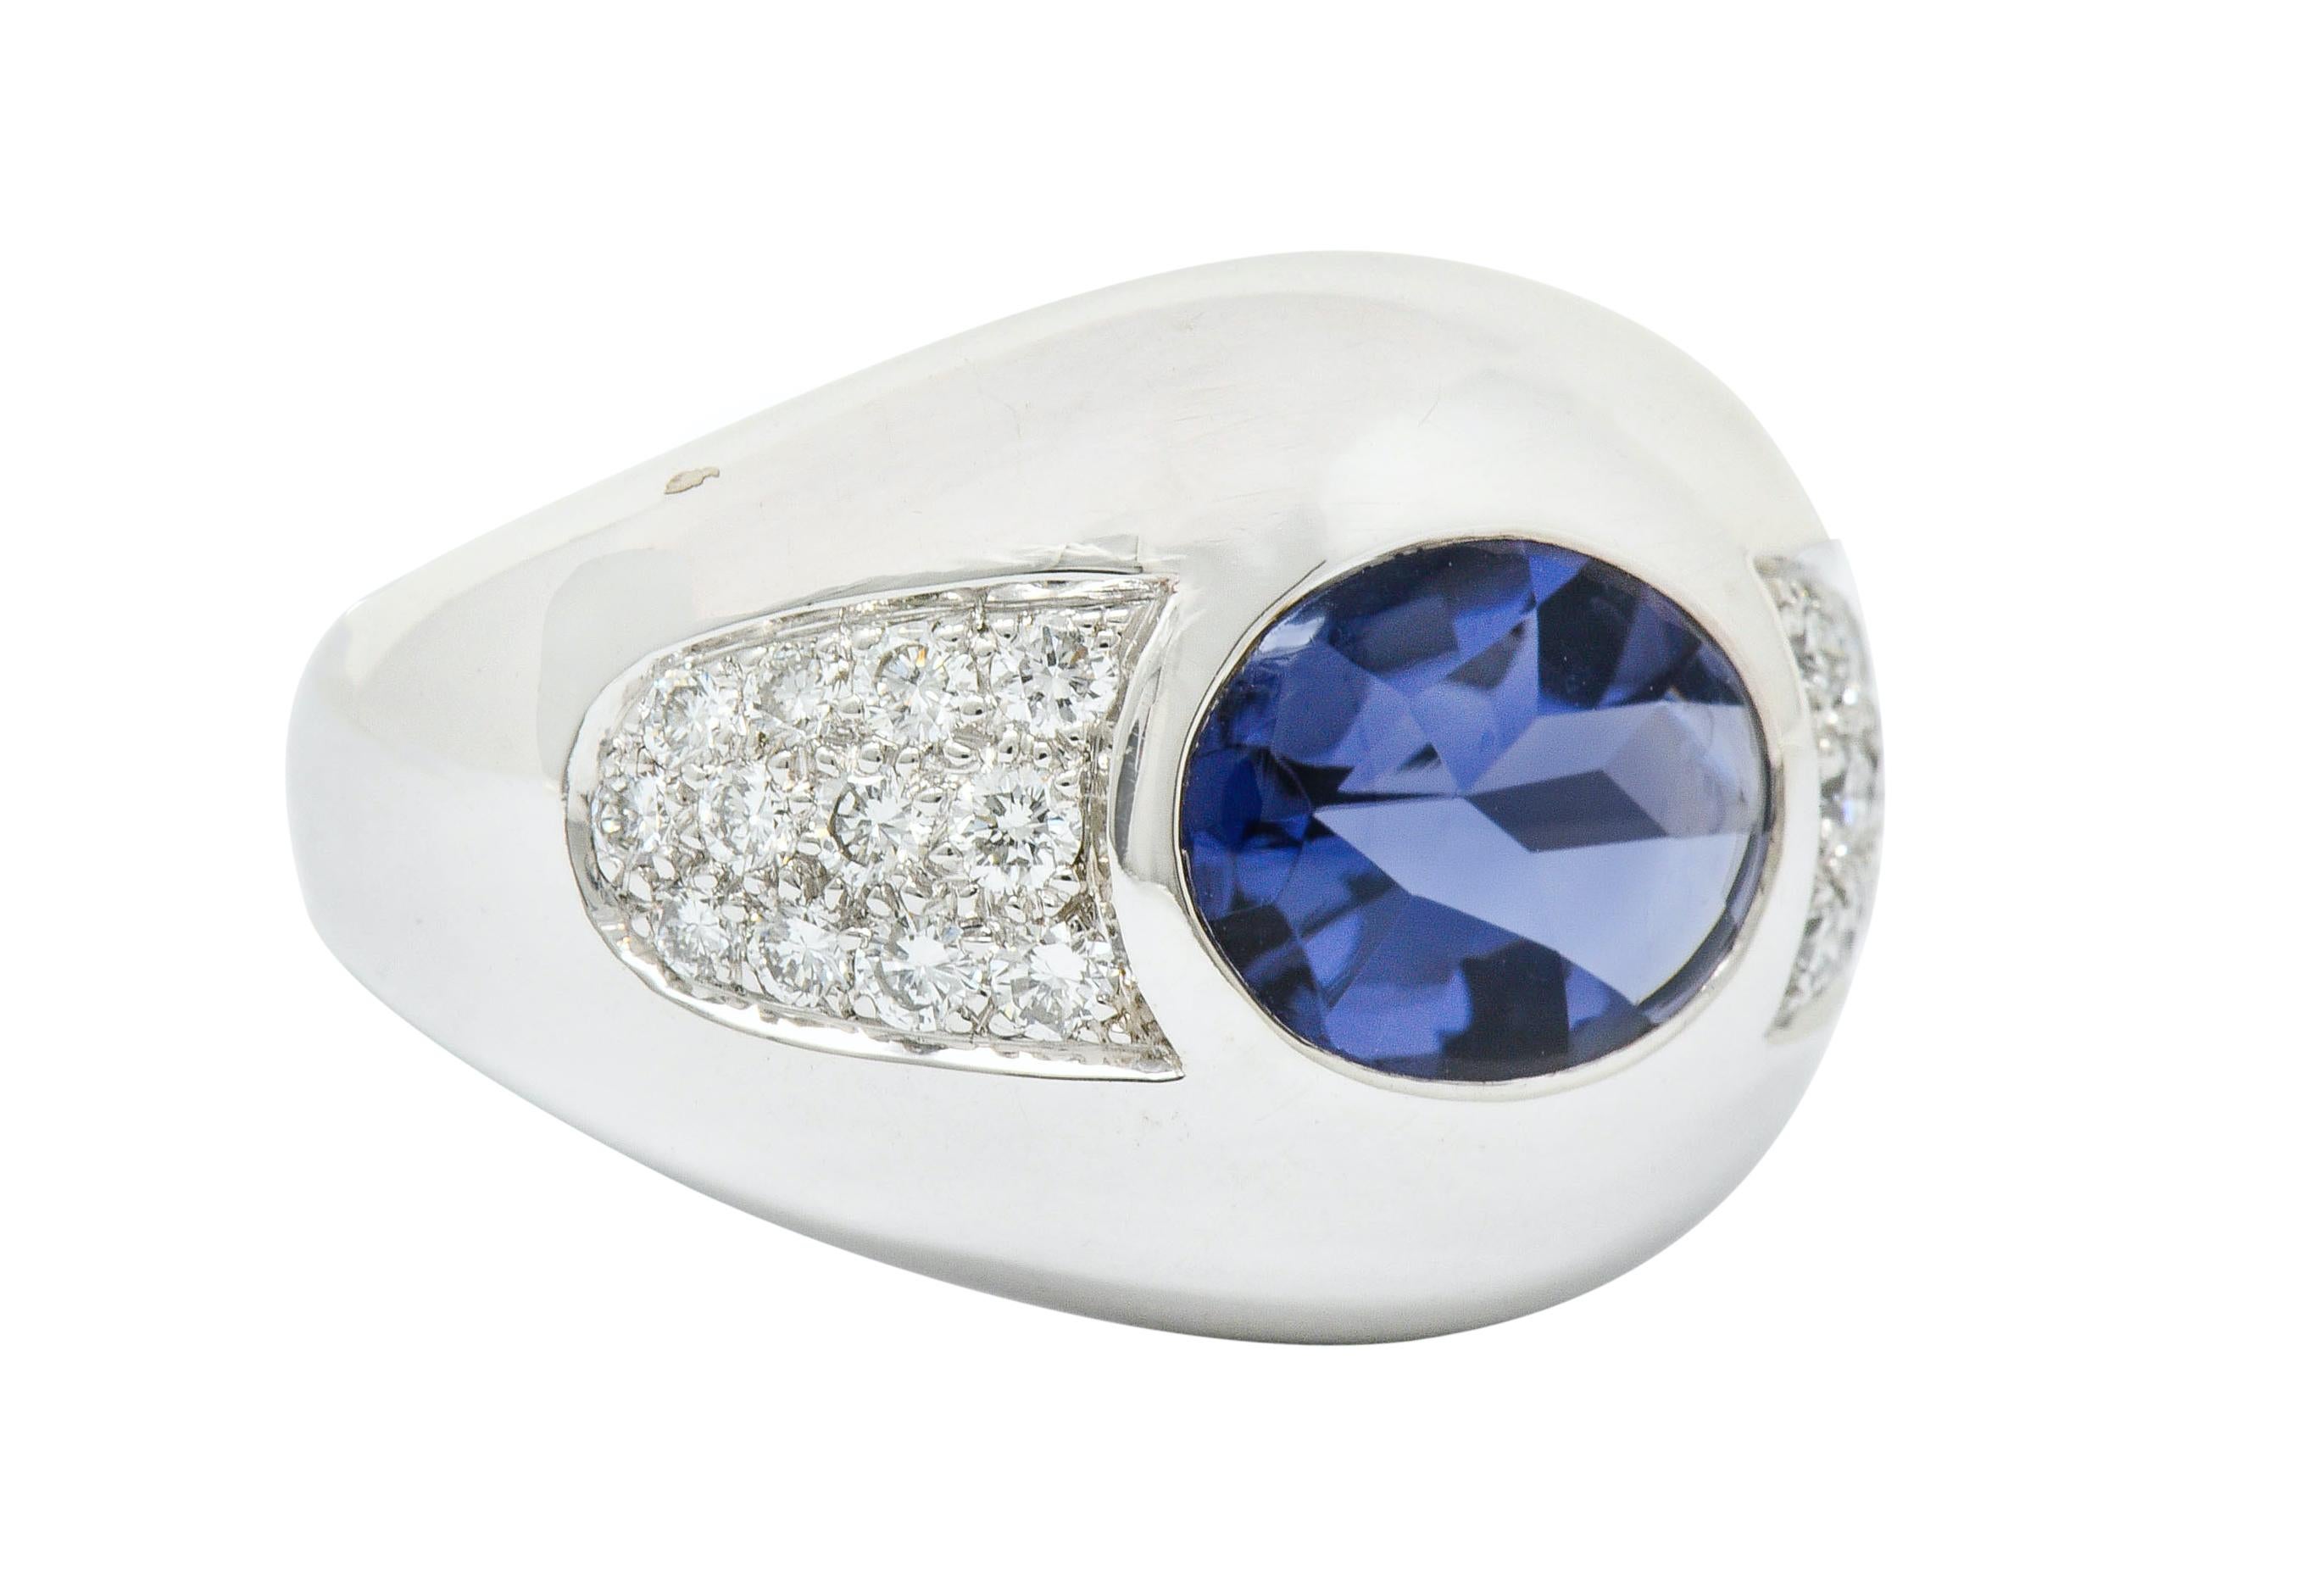 Bombay band ring centering an oval buff top iolite measuring approximately 10.5 x 8.3 mm

Transparent and brightly violet in color

Flanked by two pavè fields of round brilliant cut diamonds weighing approximately 0.65 carat; F/G color and VS